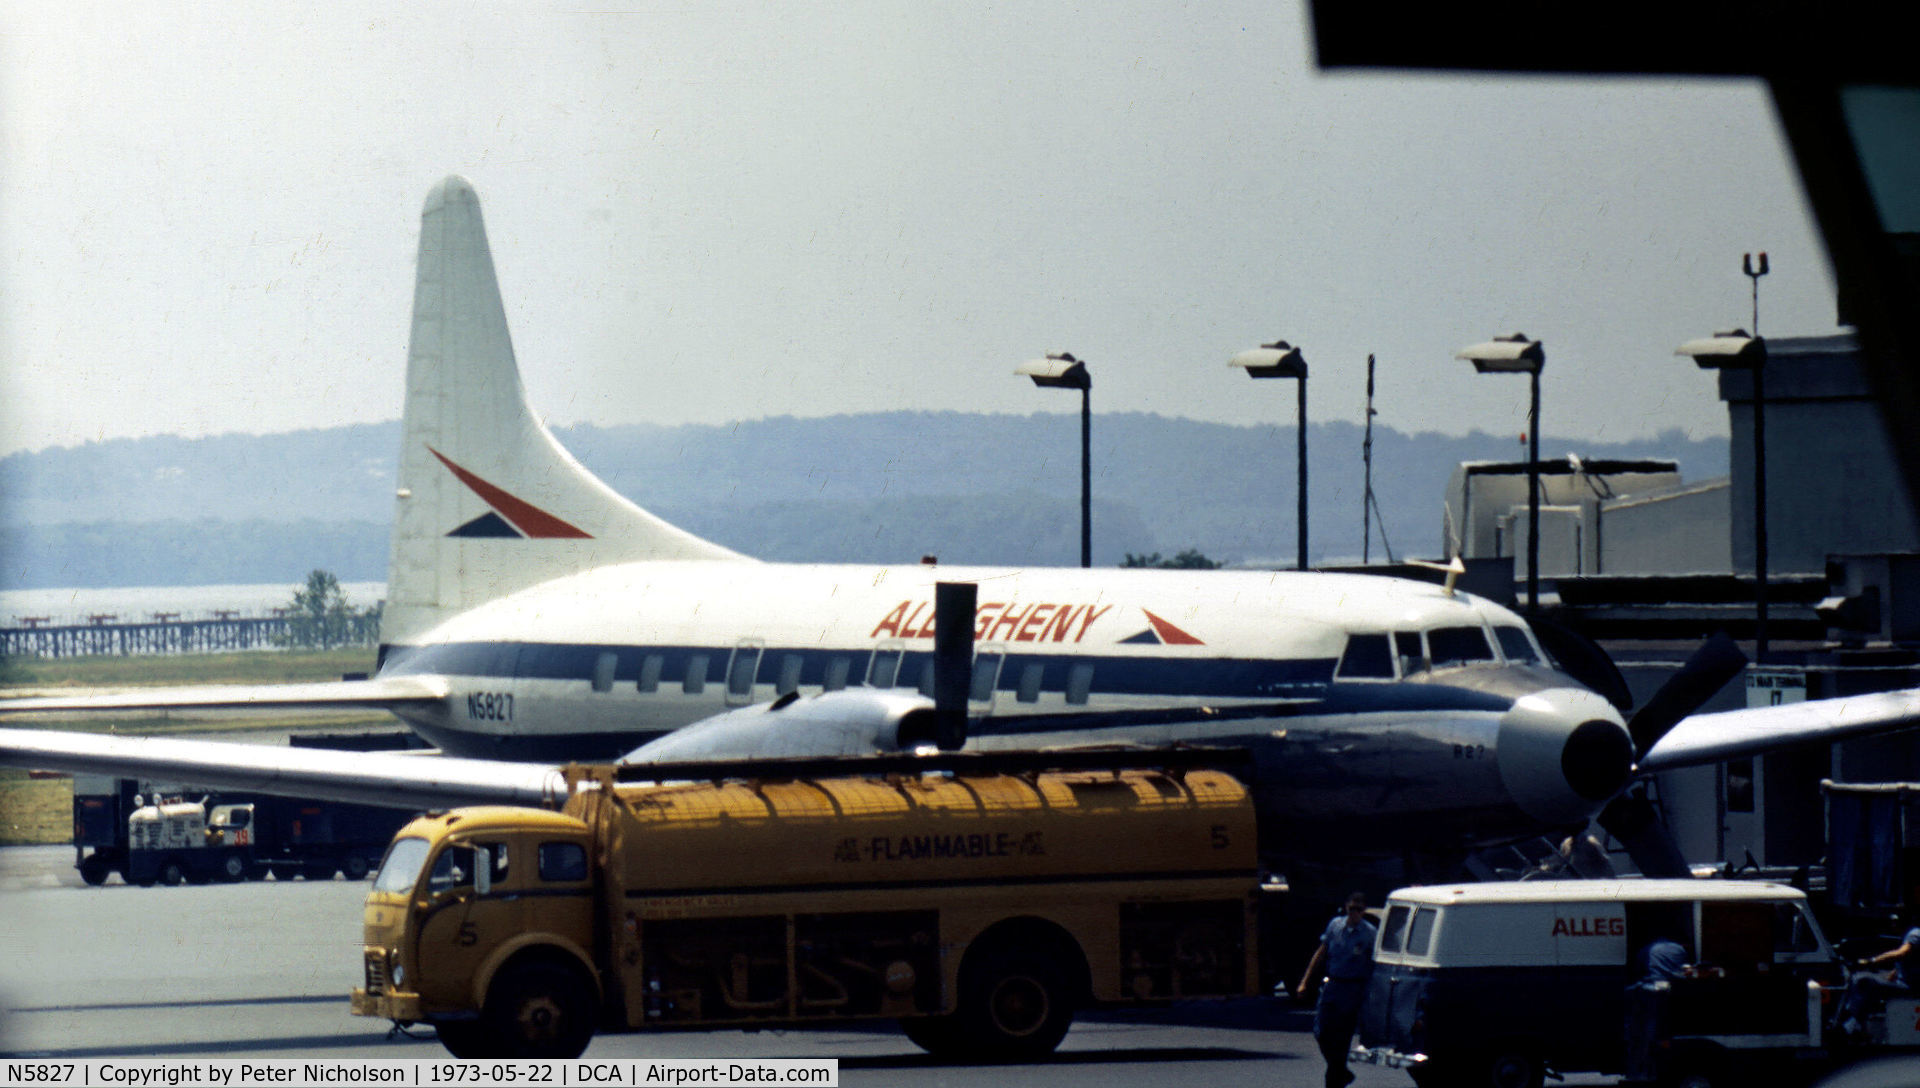 N5827, 1953 Convair 580 C/N 46, Convair 580 of Allegheny Airlines seen at what was then known as National Airport at Washington, DC.